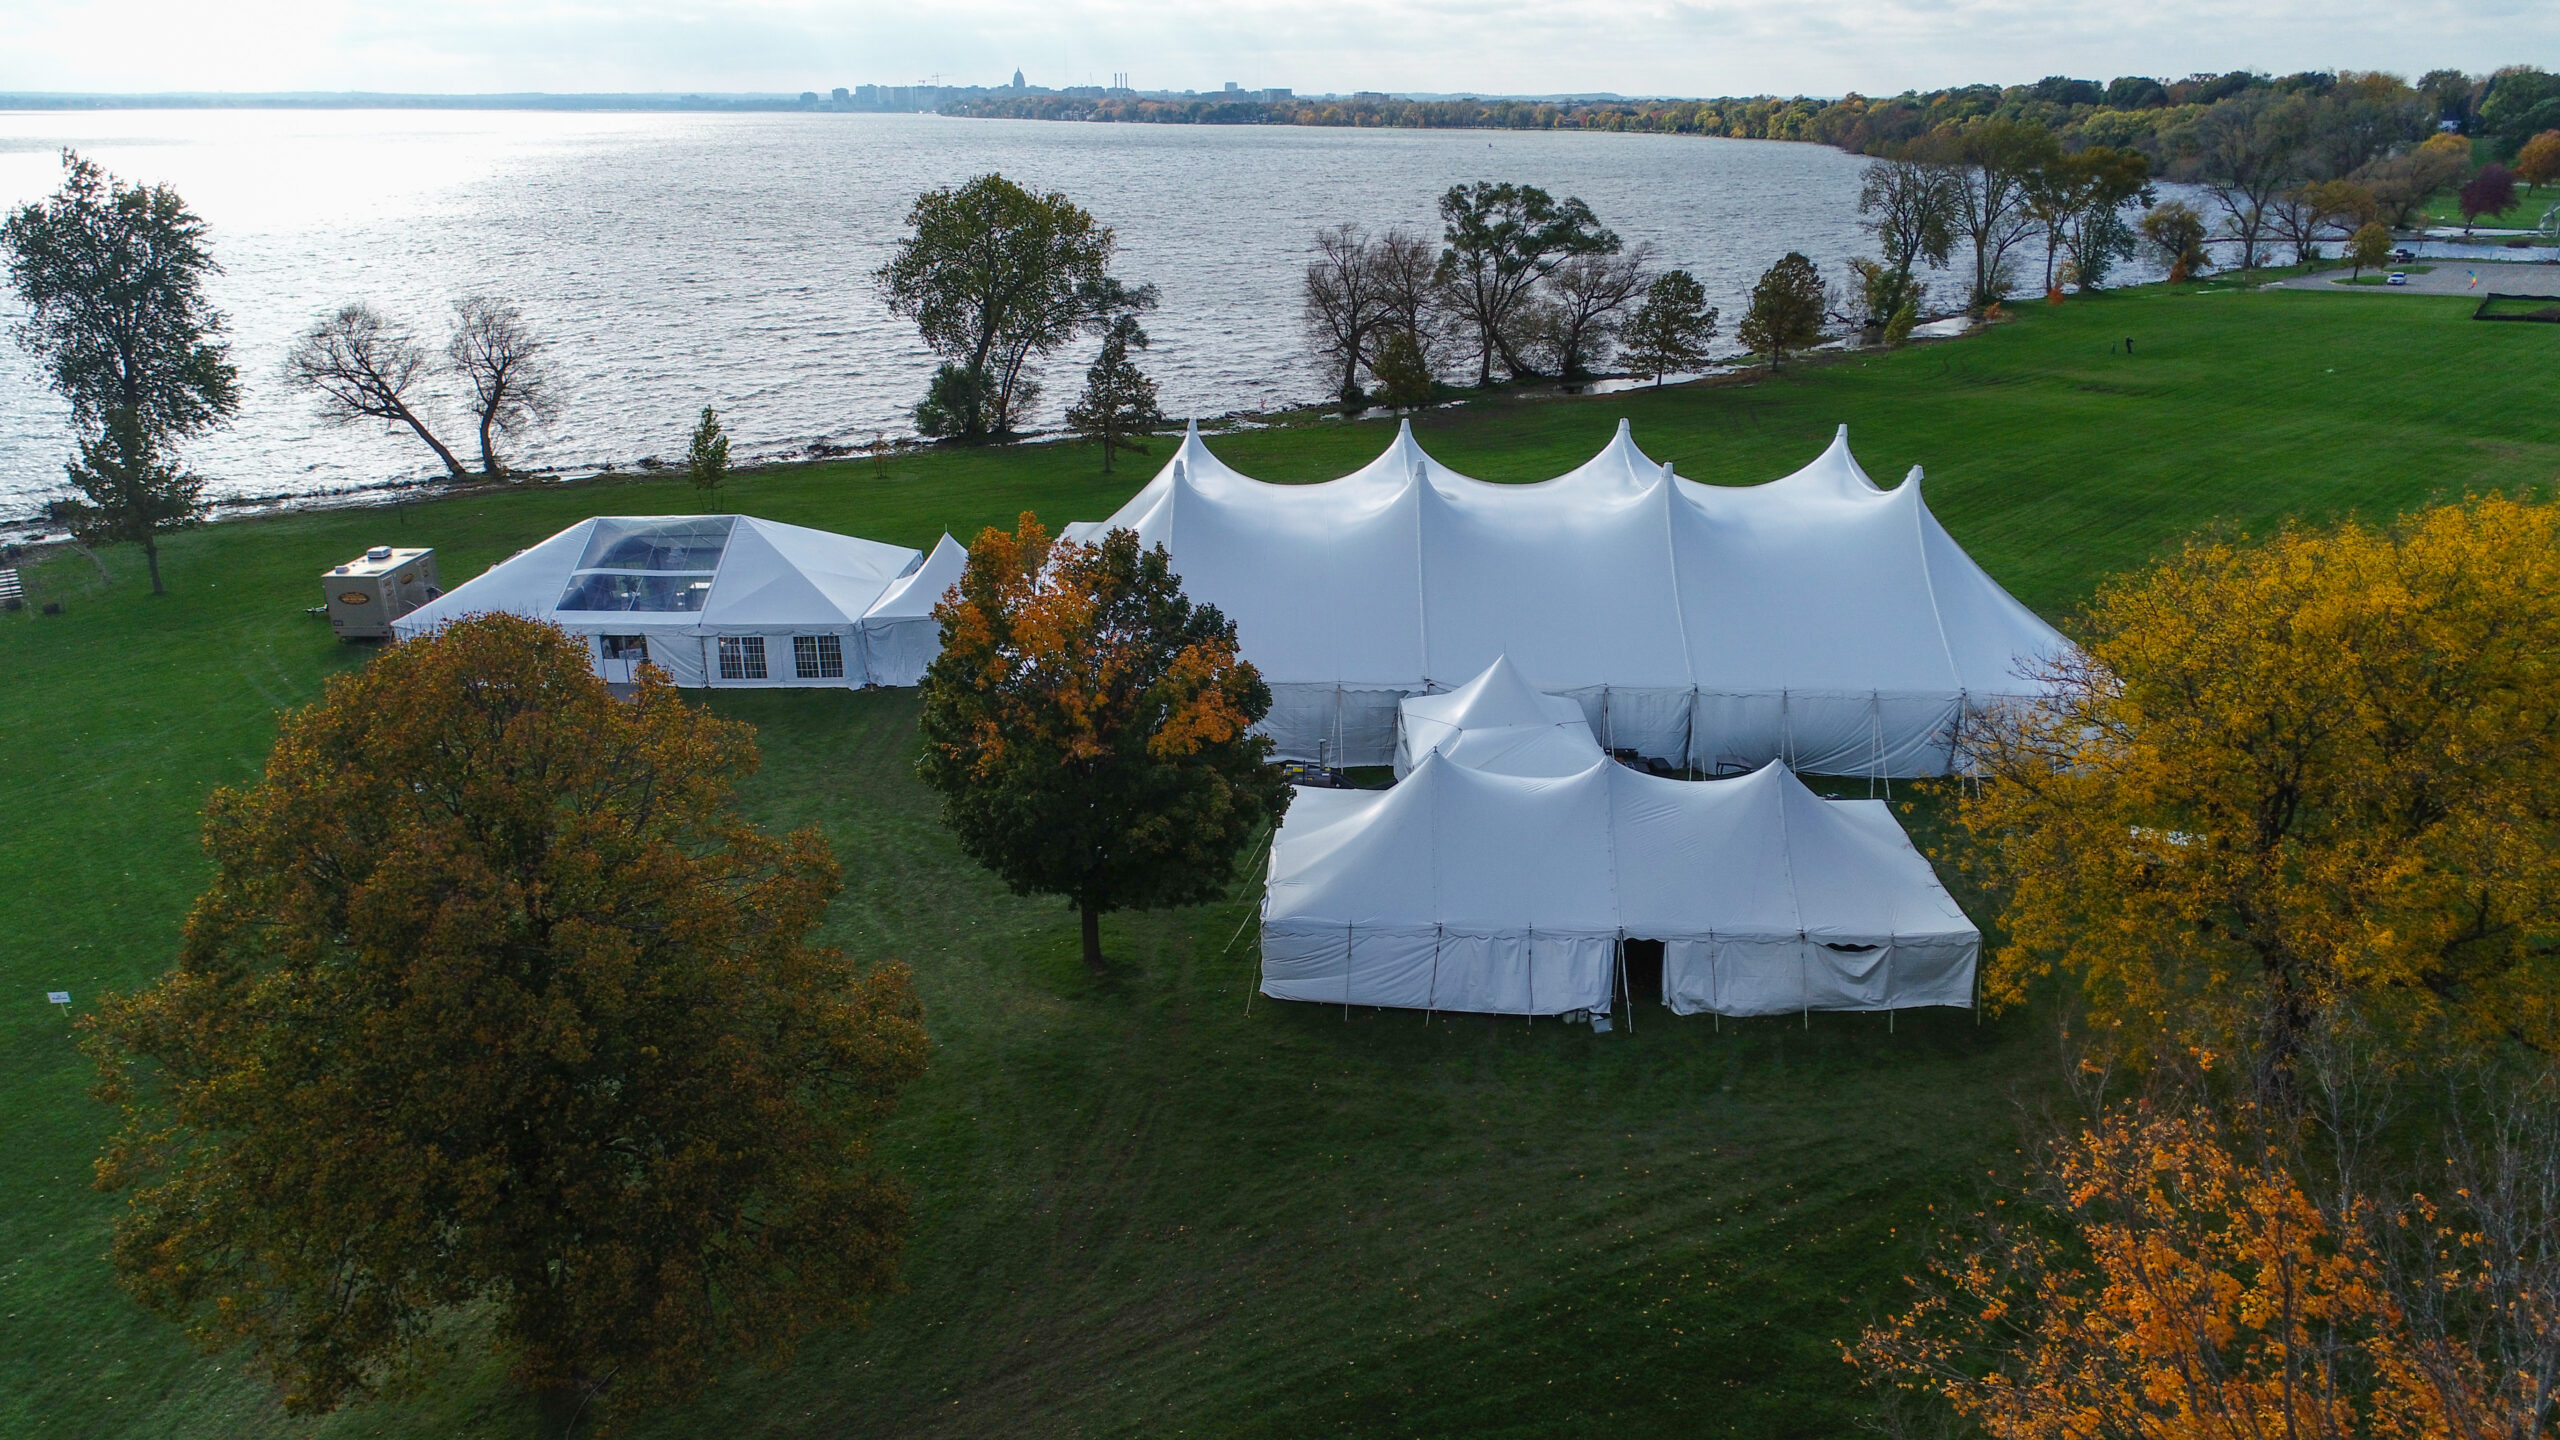 White pole tent rentals and a frame tent rental set up in a field next to a lake, for an outdoor picnic in the park event.